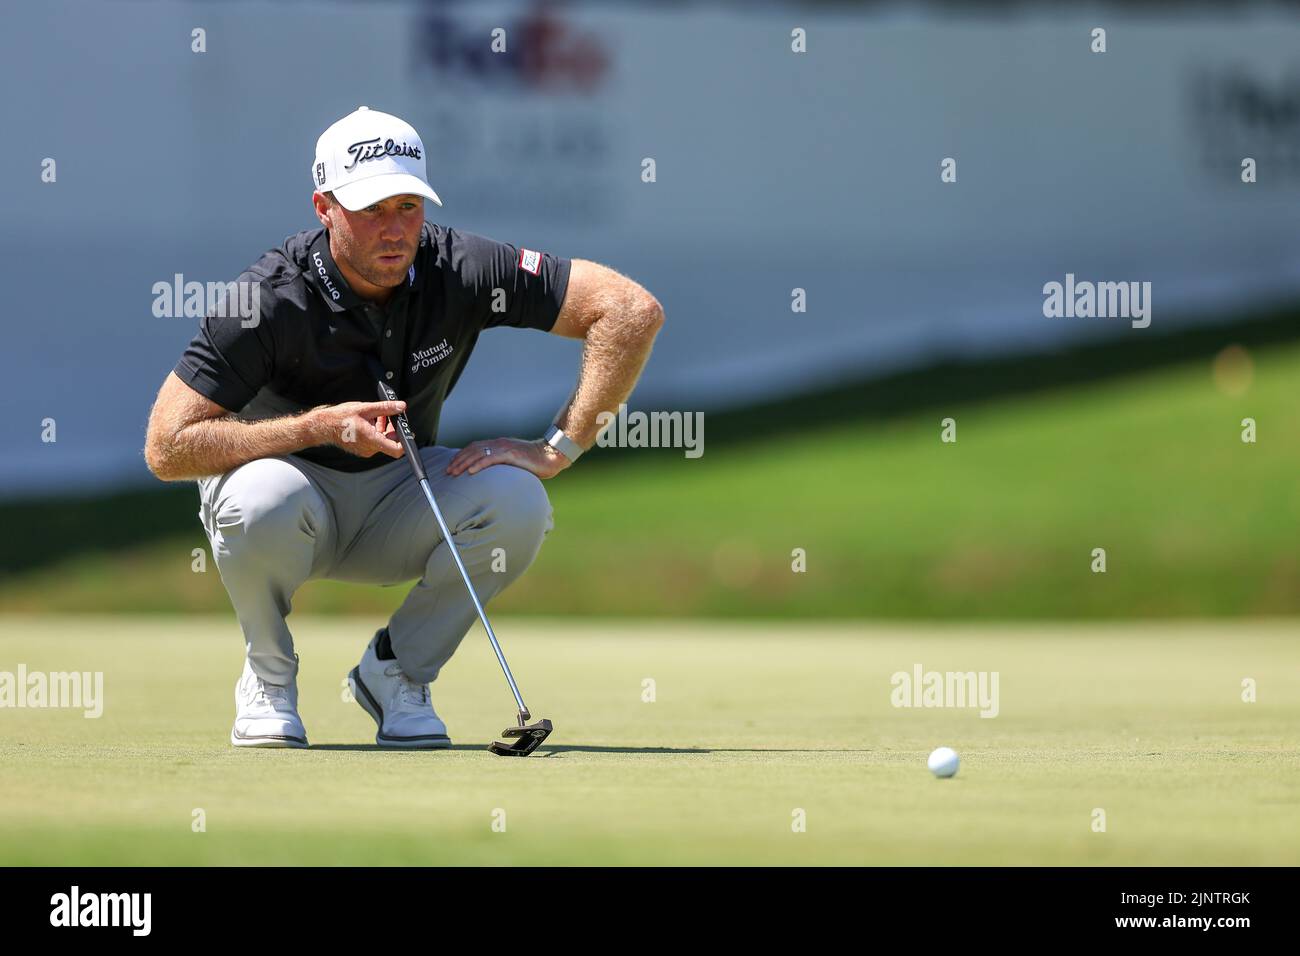 August 13, 2022: Tyler Duncan sizes up his putt on the 11th hole during the third round of the FedEx St. Jude Championship golf tournament at TPC Southwind in Memphis, TN. Gray Siegel/Cal Sport Media Stock Photo